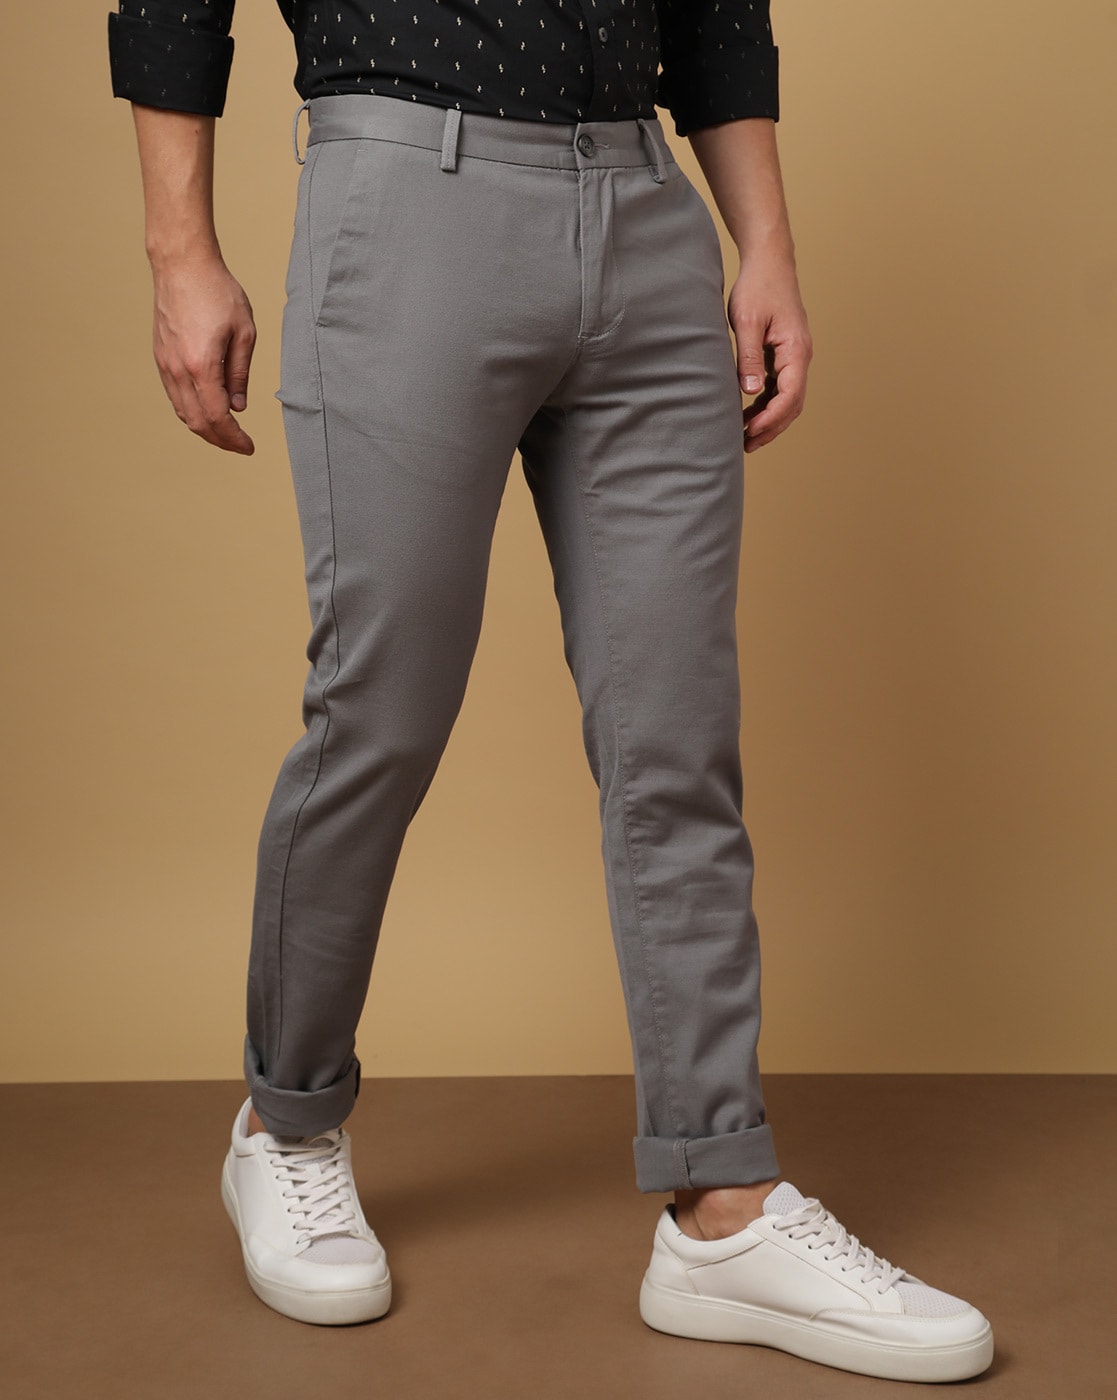 Sports Trousers  Buy Sports Trousers online in India